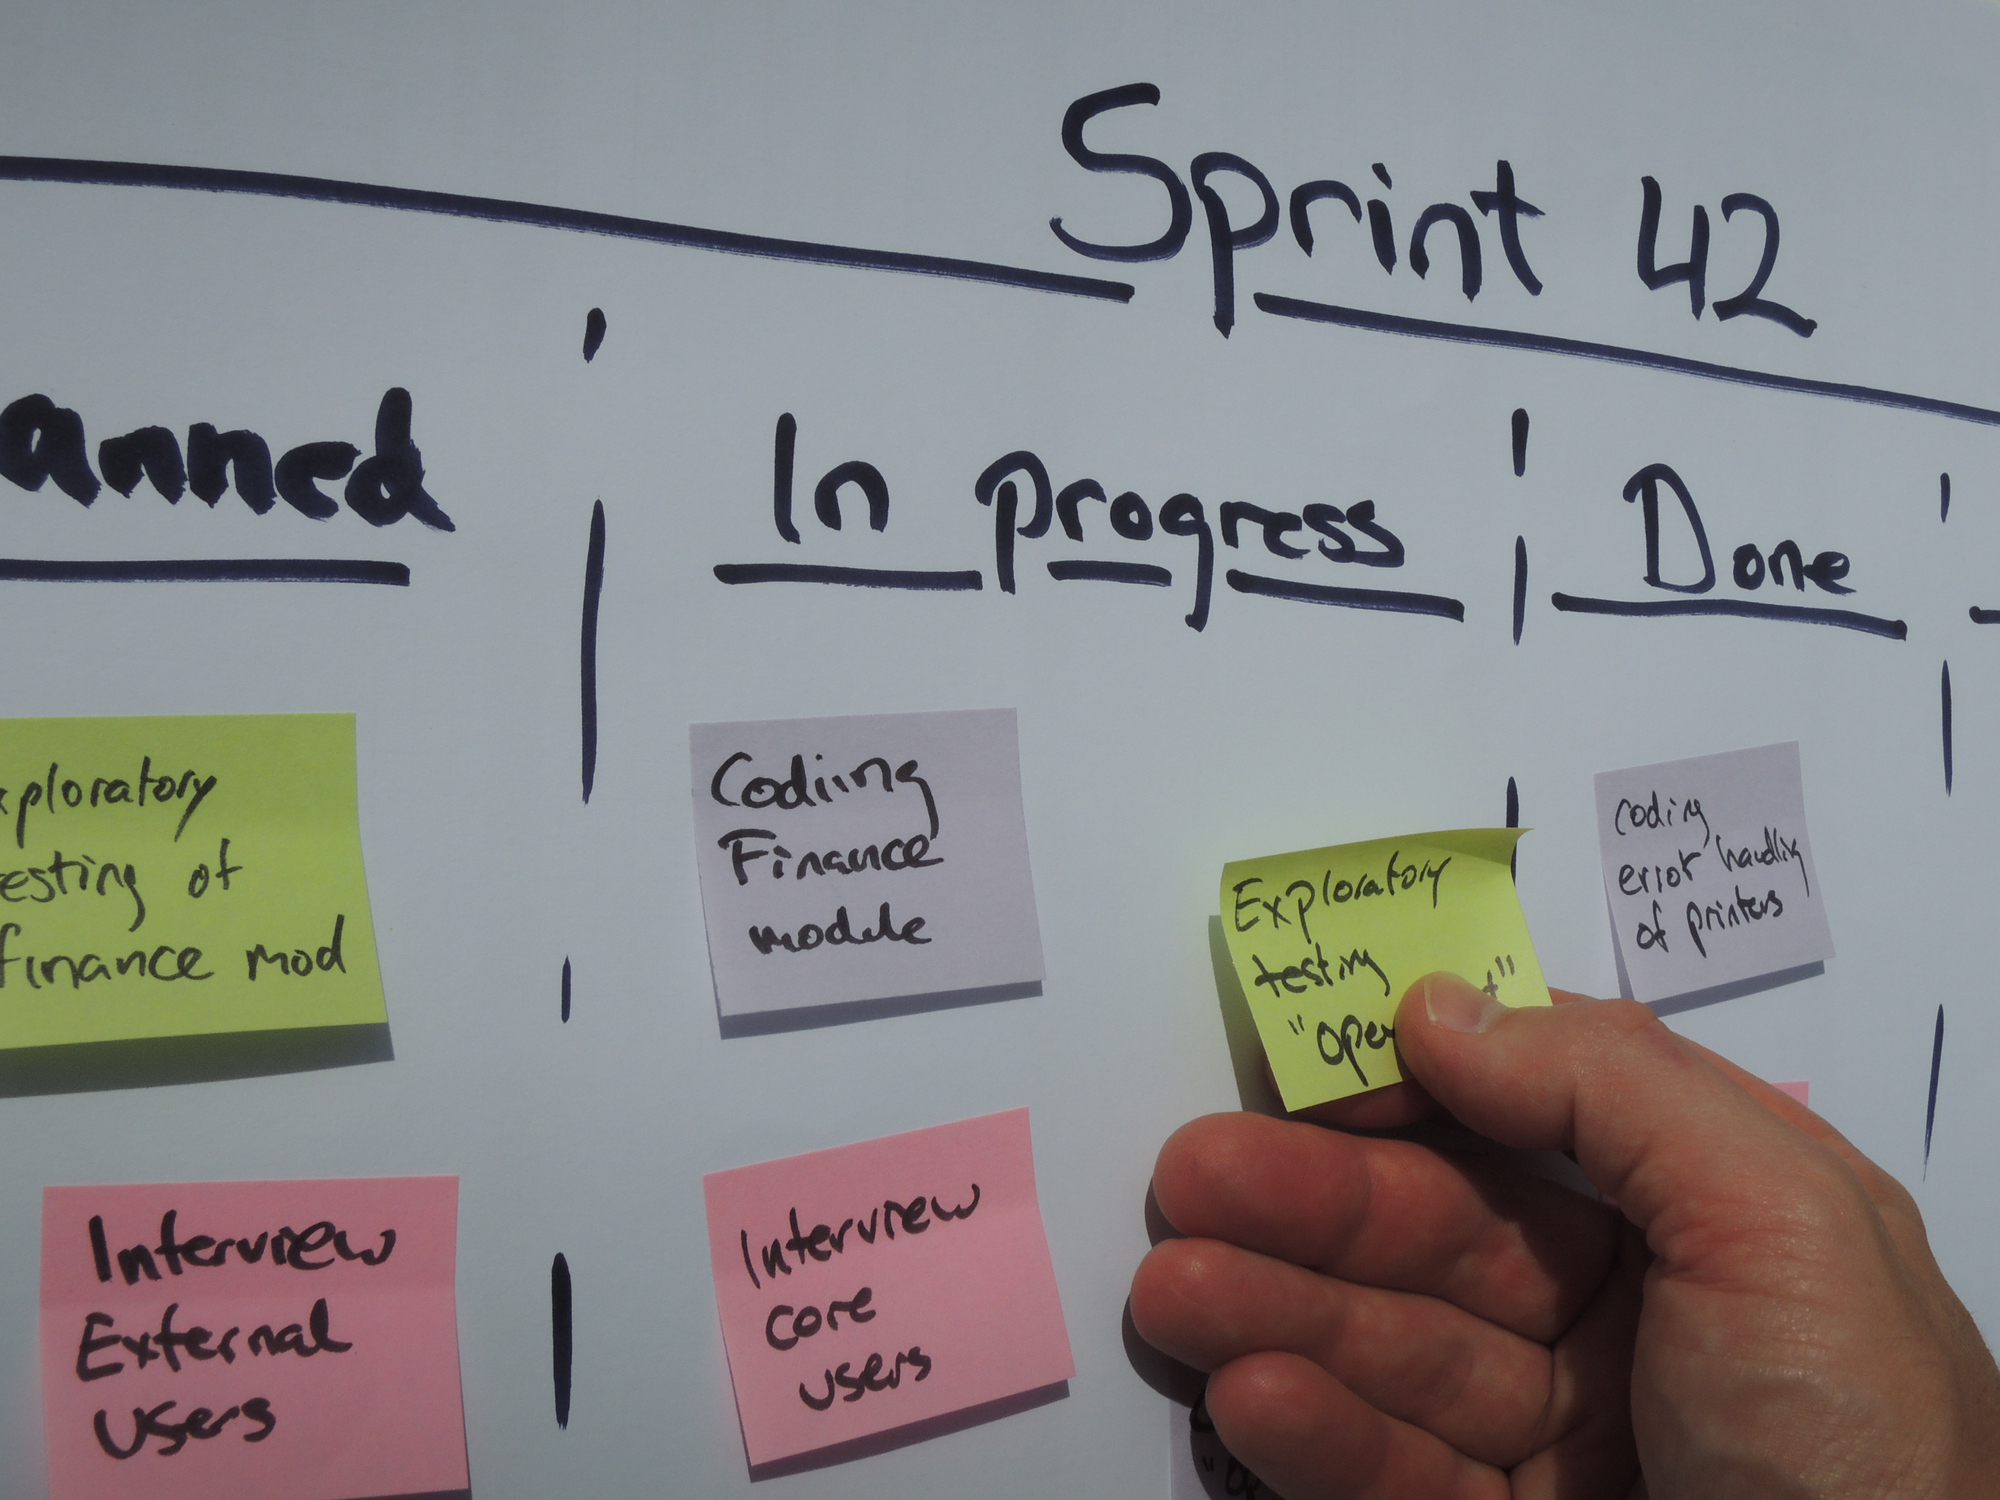 Agile vs. Scrum: Is There a Difference?